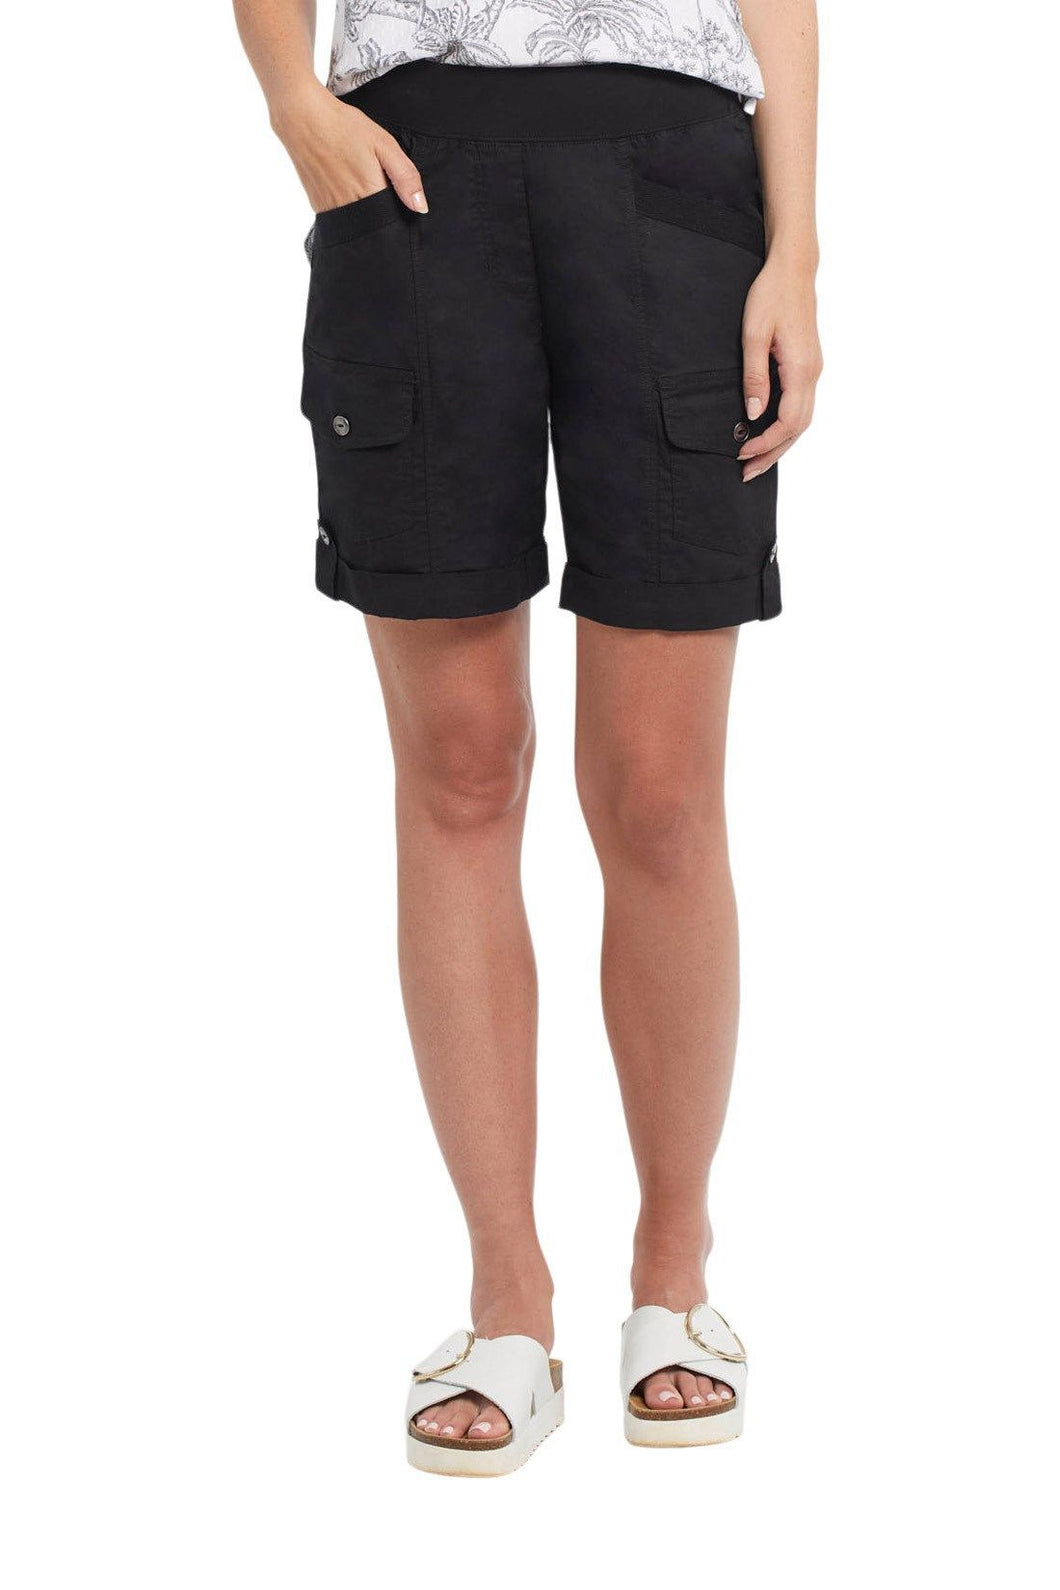 Our Willa Pull On Cuffed Short offers details that give this short pizazz! We love the comfort of the pull-on waistband and soft stretch poplin fabric offering all day comfort. The style of the rolled up hem with tabs, side cargo pockets, front and back pockets, and the perfectly flattering 7' inseam, give the right combination of sportiness and statement-making style. 